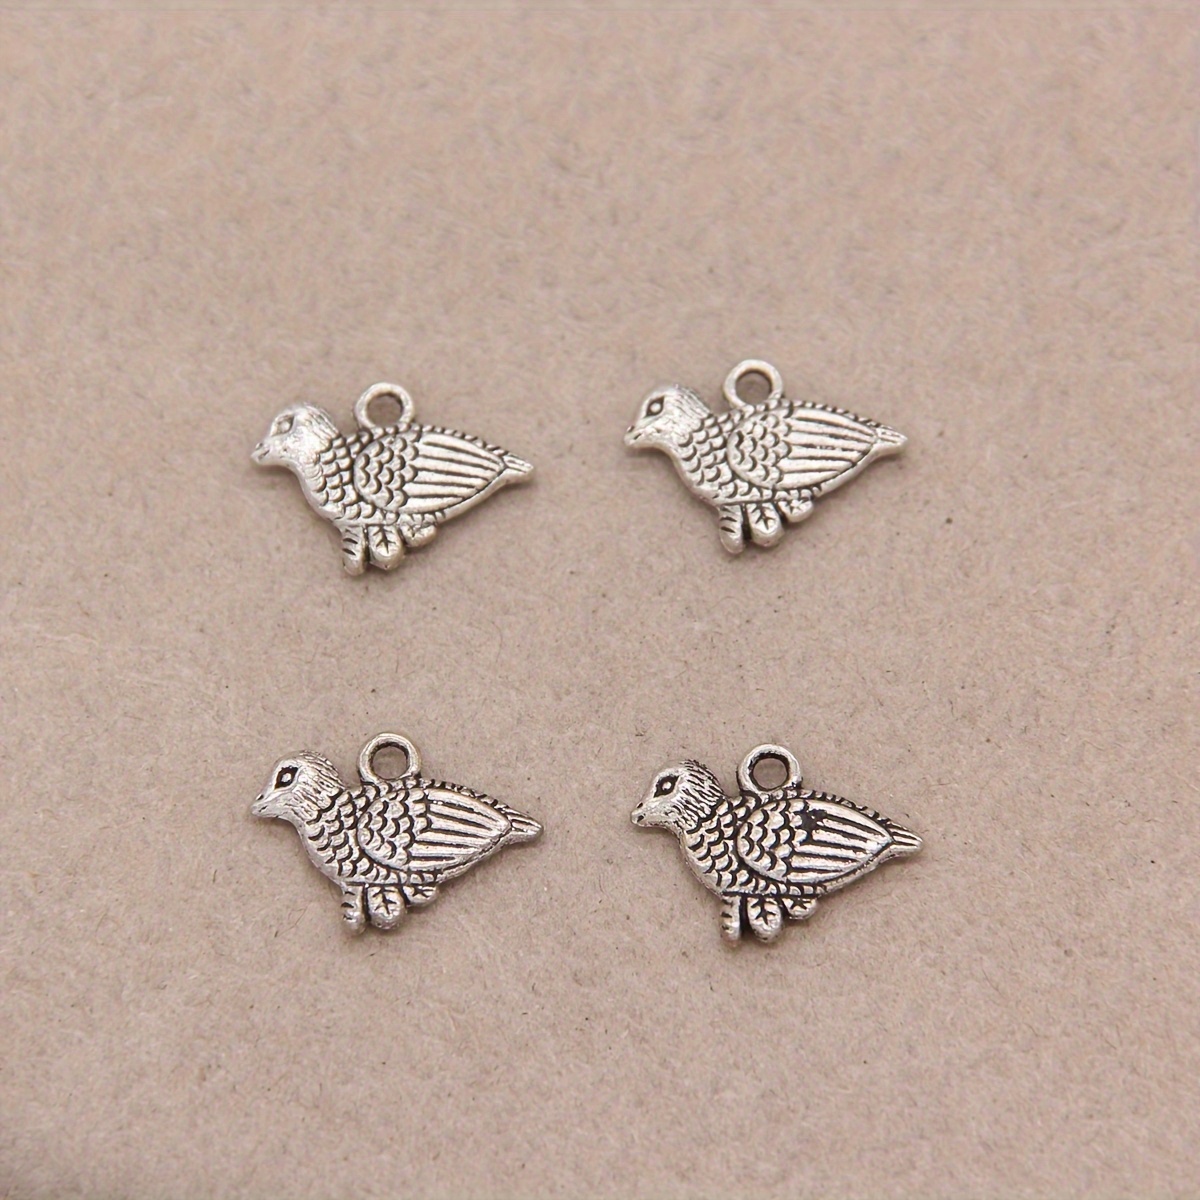  ALIMITOPIA Zoo Animals Charms,Alloy Multistyle Creatures  Insects Birds Charm Pendant for DIY Jewelry Making  Accessaries(100pcs,Antique Silver Tone) : Arts, Crafts & Sewing